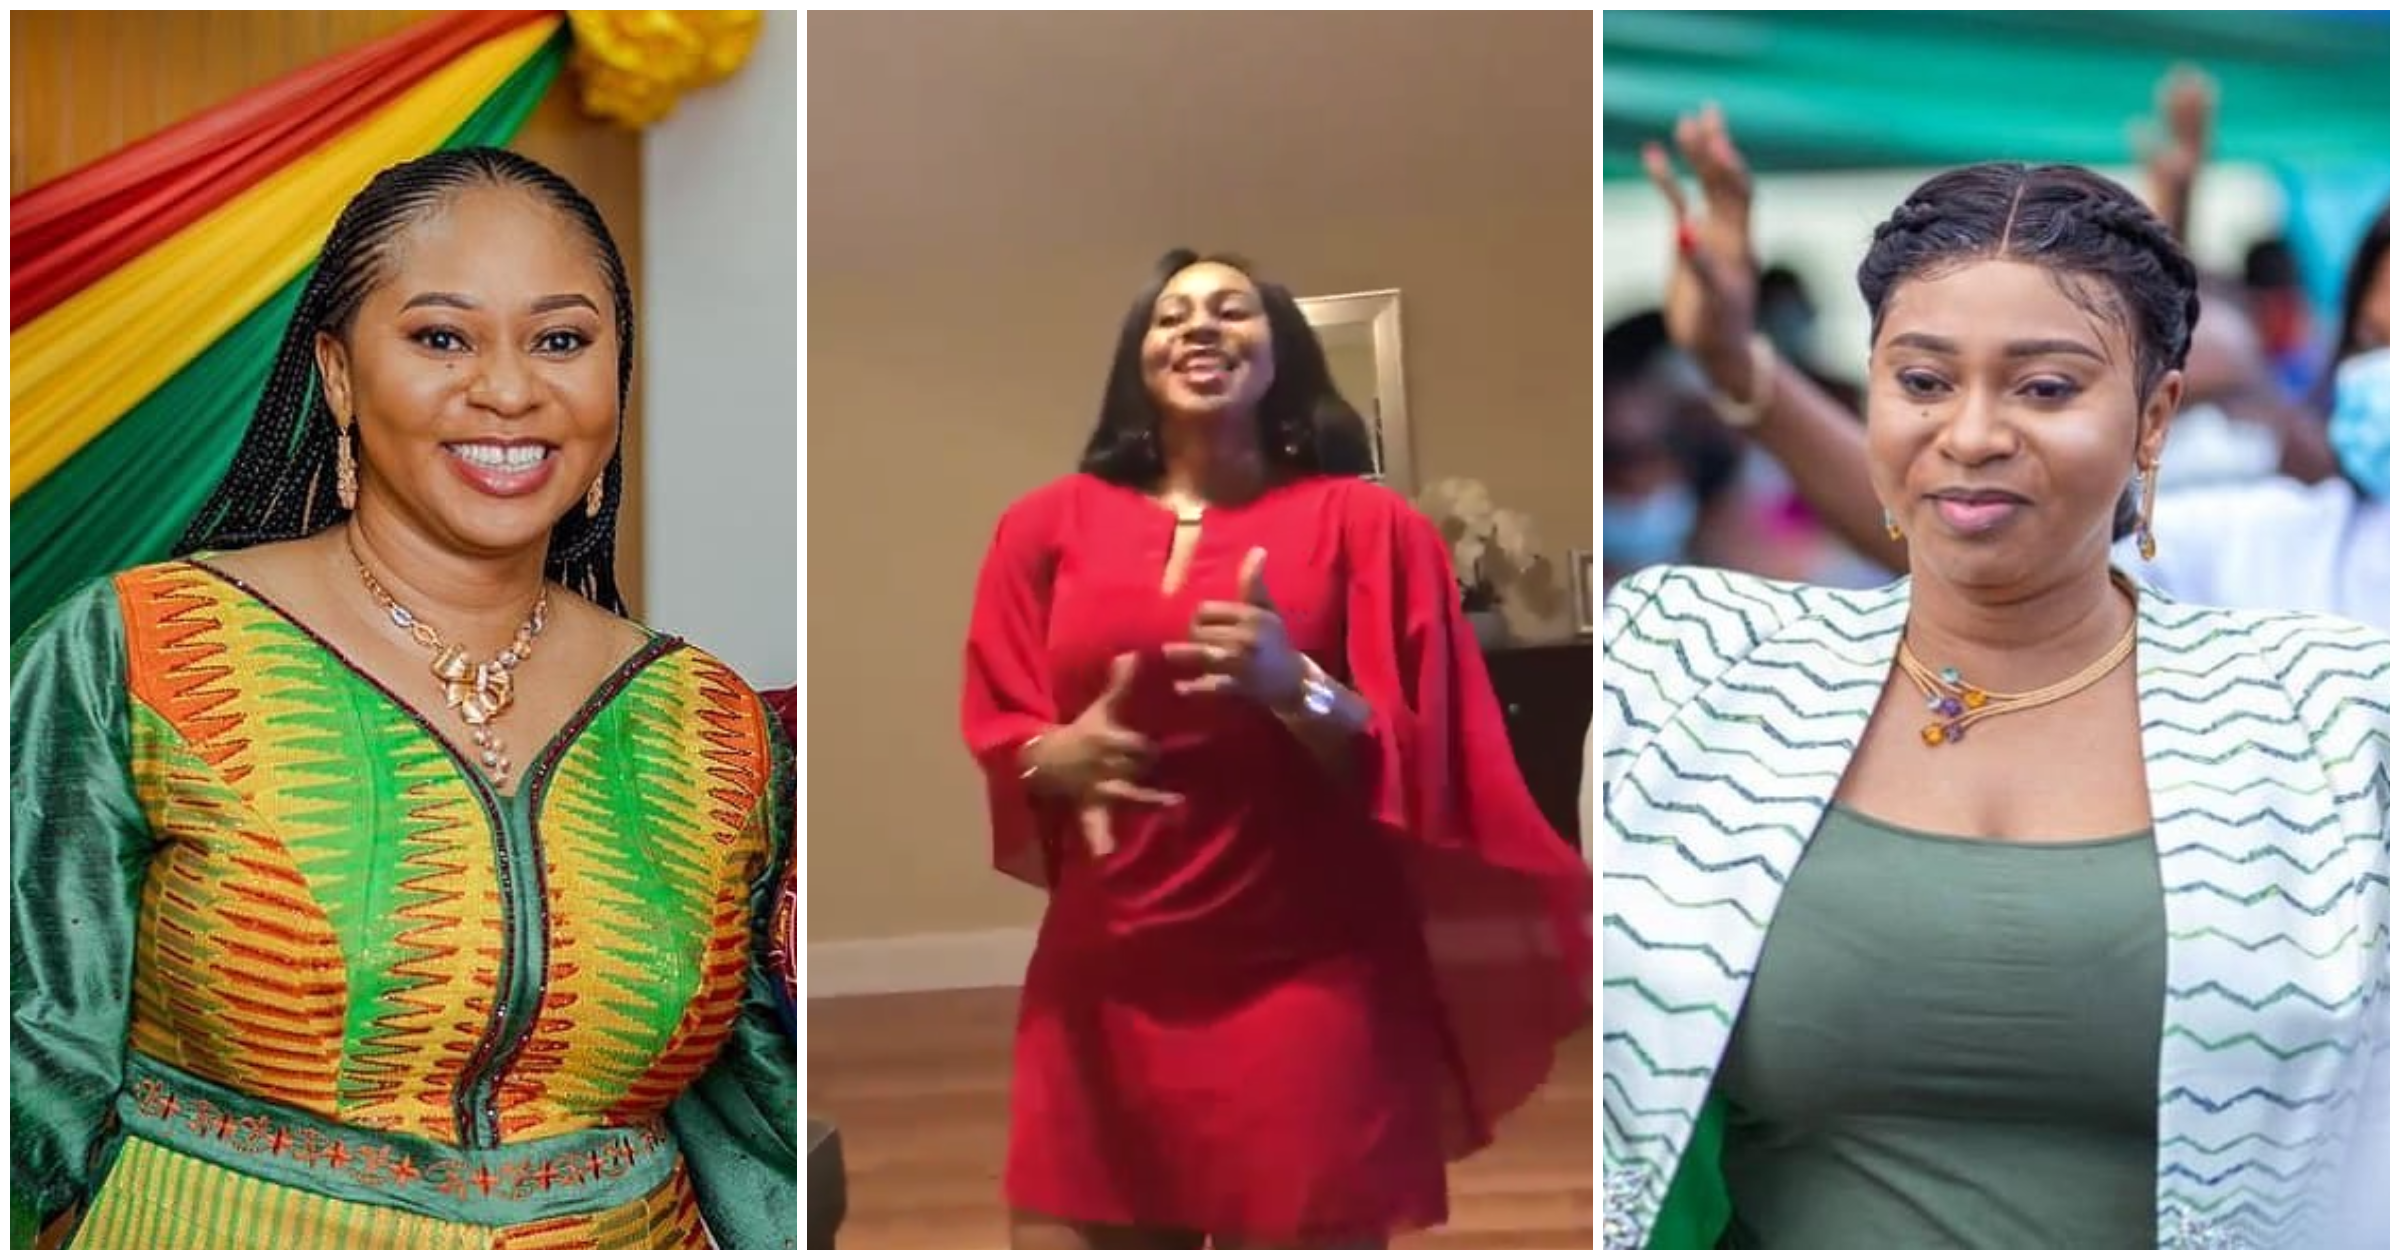 Yentie obiaa: Video of Adwoa Safo dancing to KiDi's song emerges as Ken Agyapong blasts her